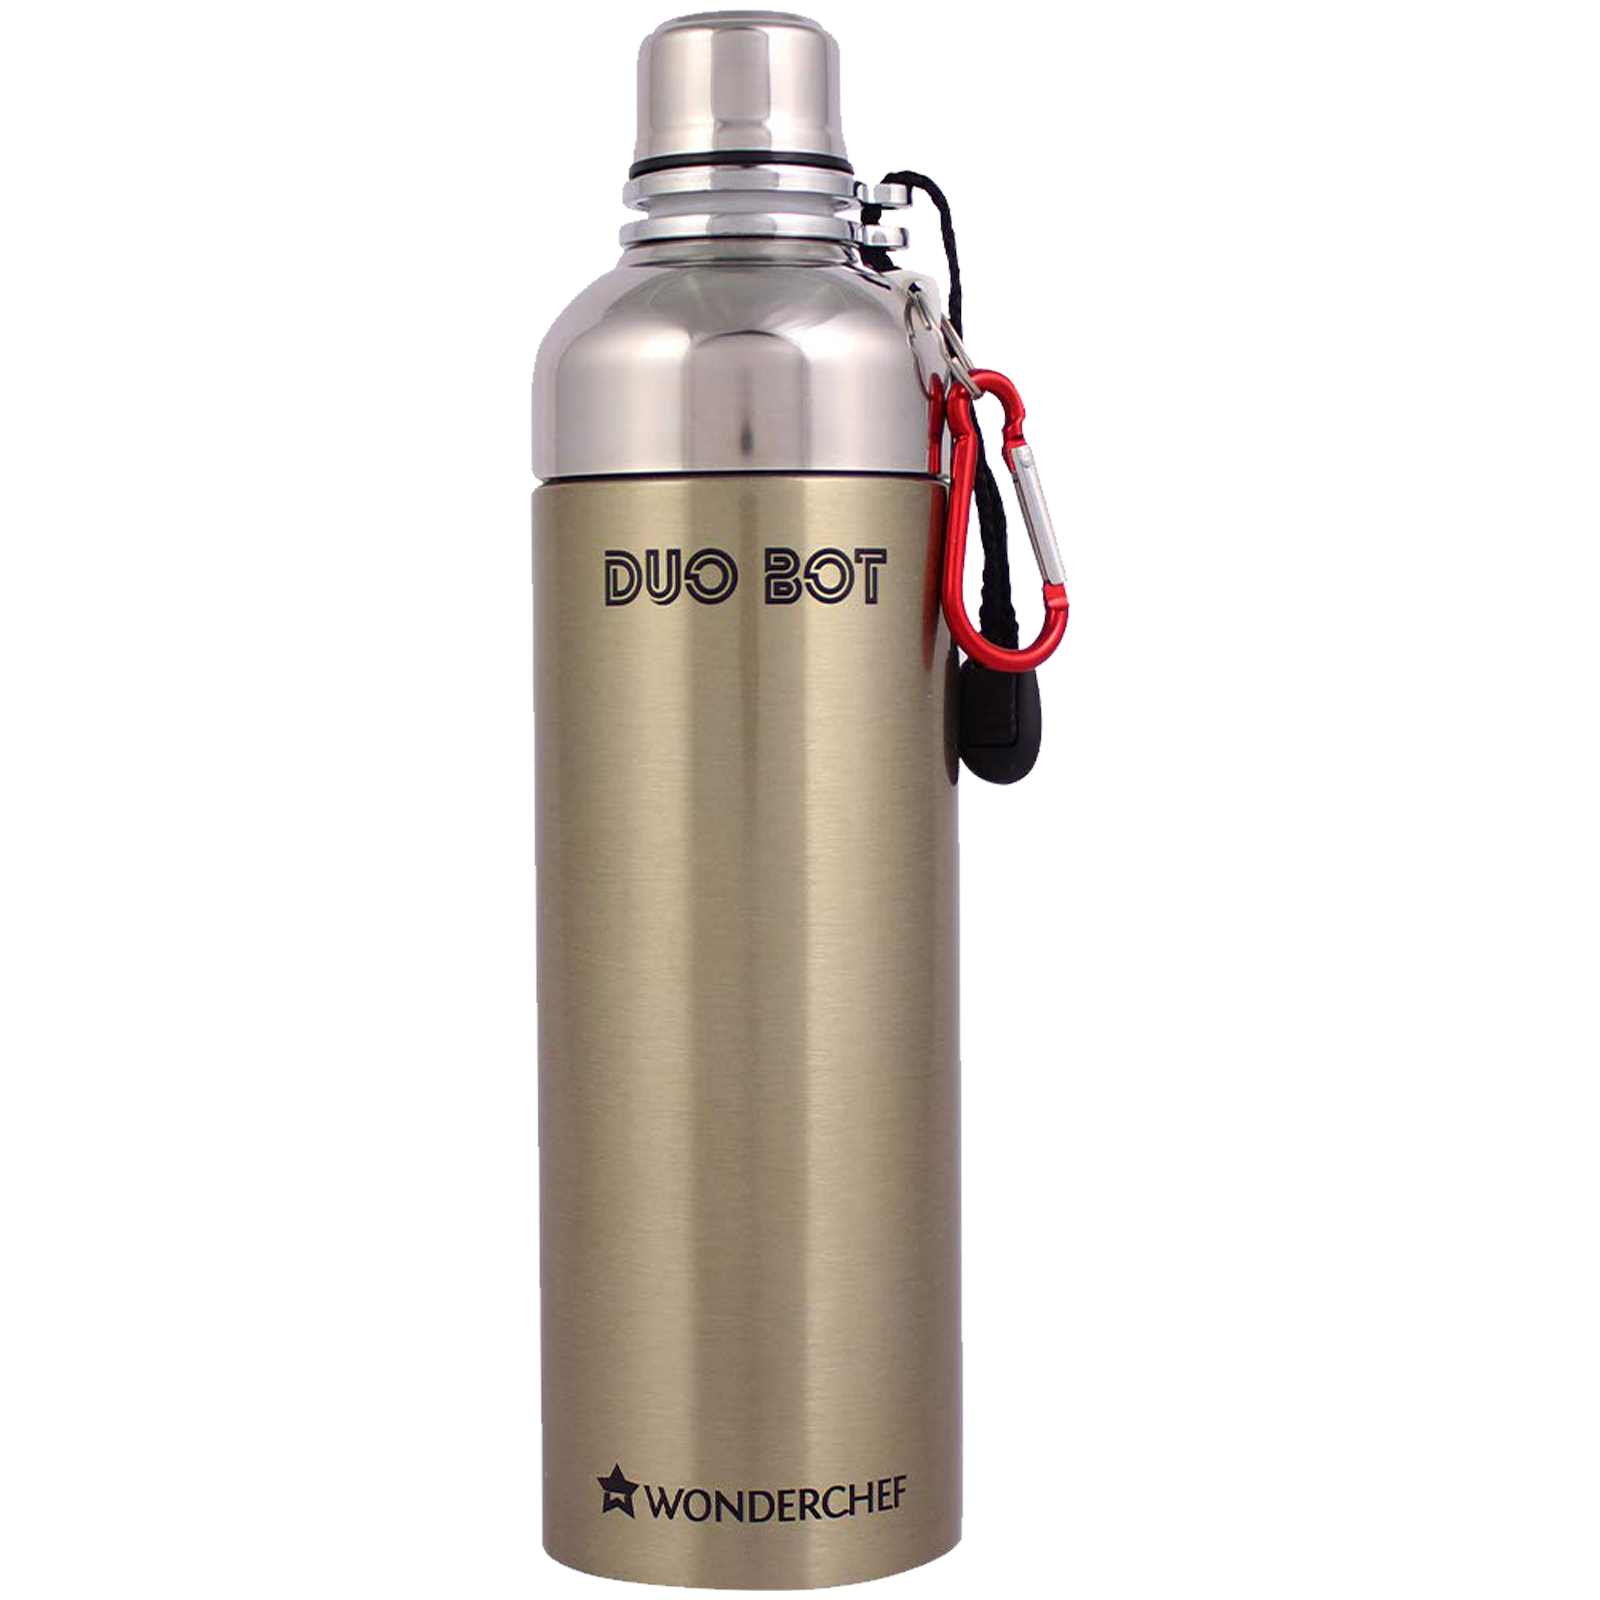 Wonderchef Duo-Bot 0.75 Litres Stainless Steel Water Bottle (Spill and Leak Proof, 63153154, Gold)_1